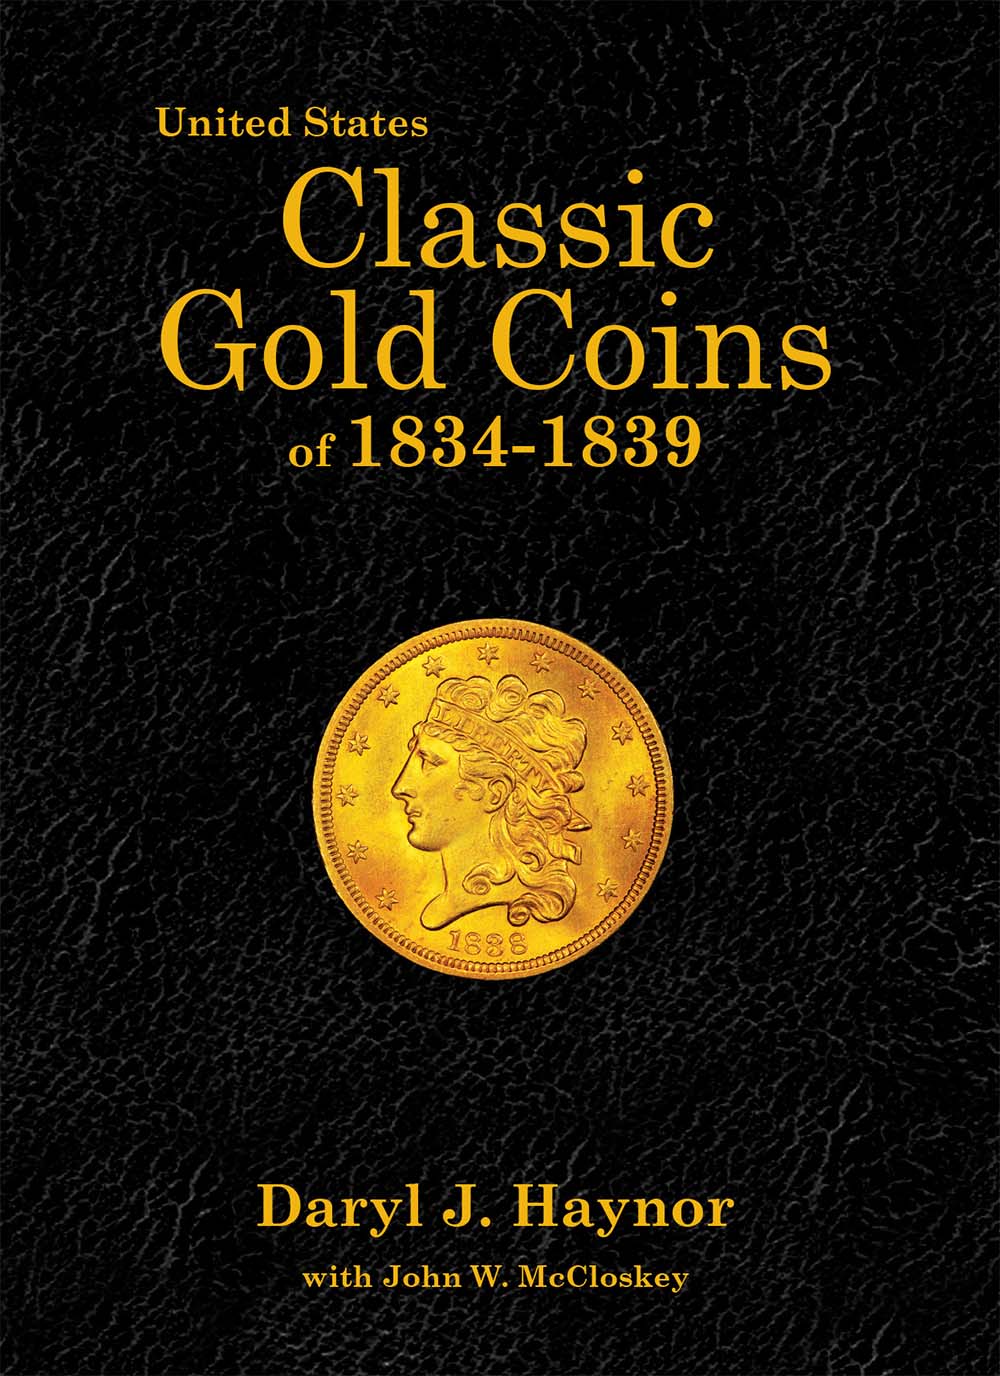 US Classic Gold Coins of 1834-1839 Reference Guide Standard Ed With Autograph 